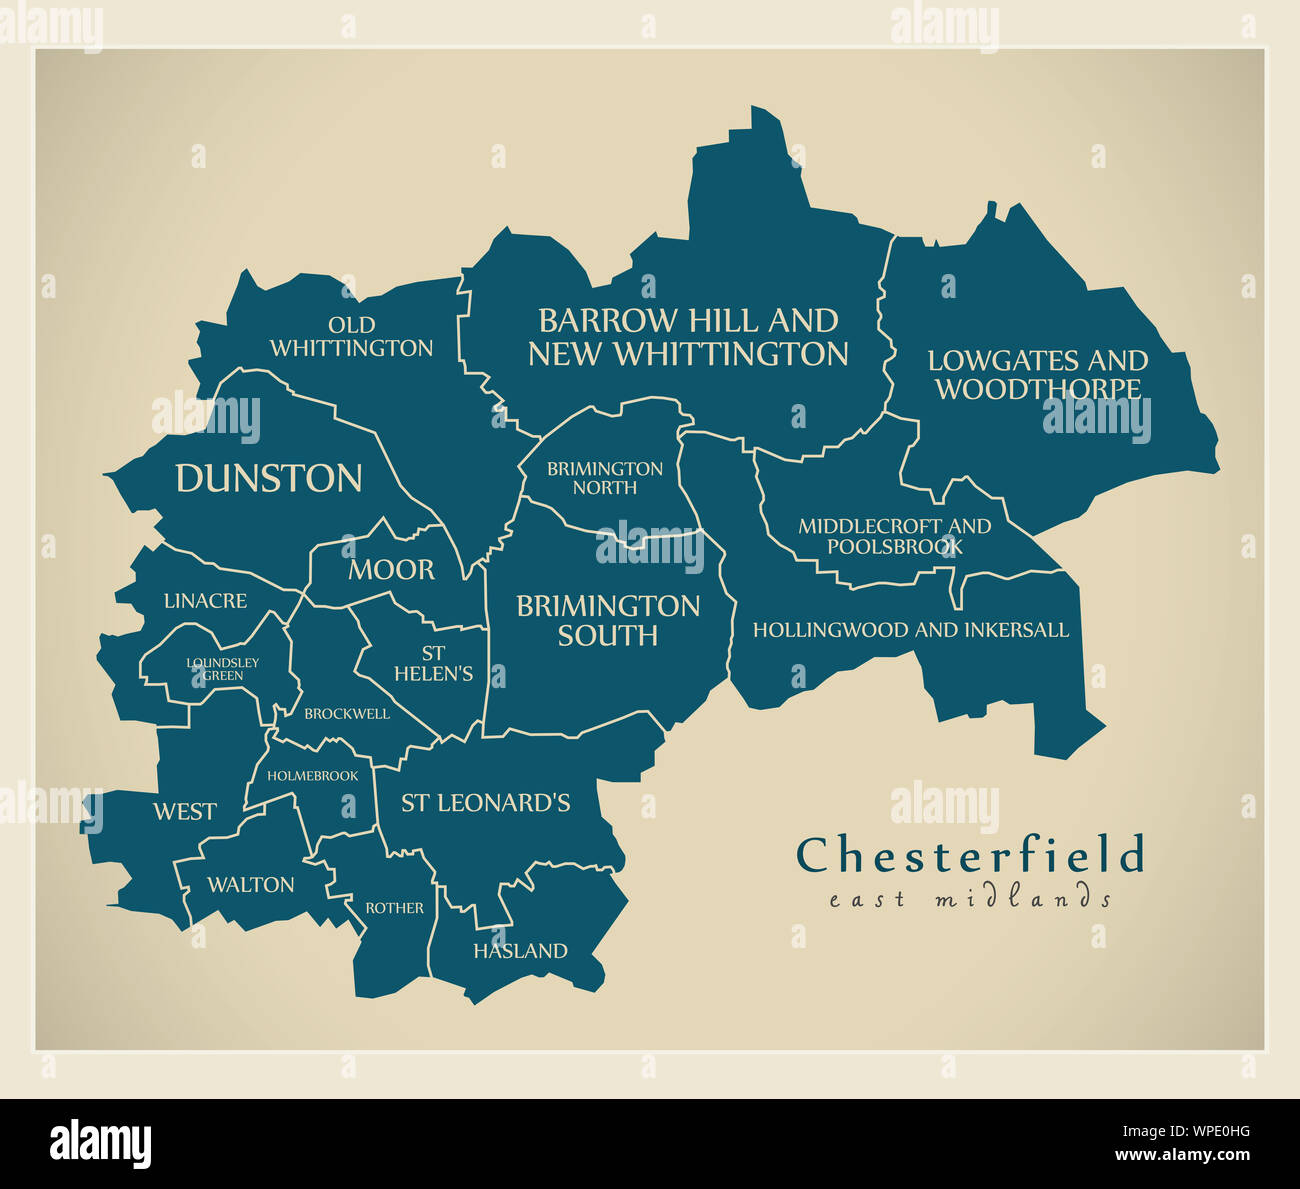 Wards map of Chesterfield district in East Midlands England UK with labels Stock Photo